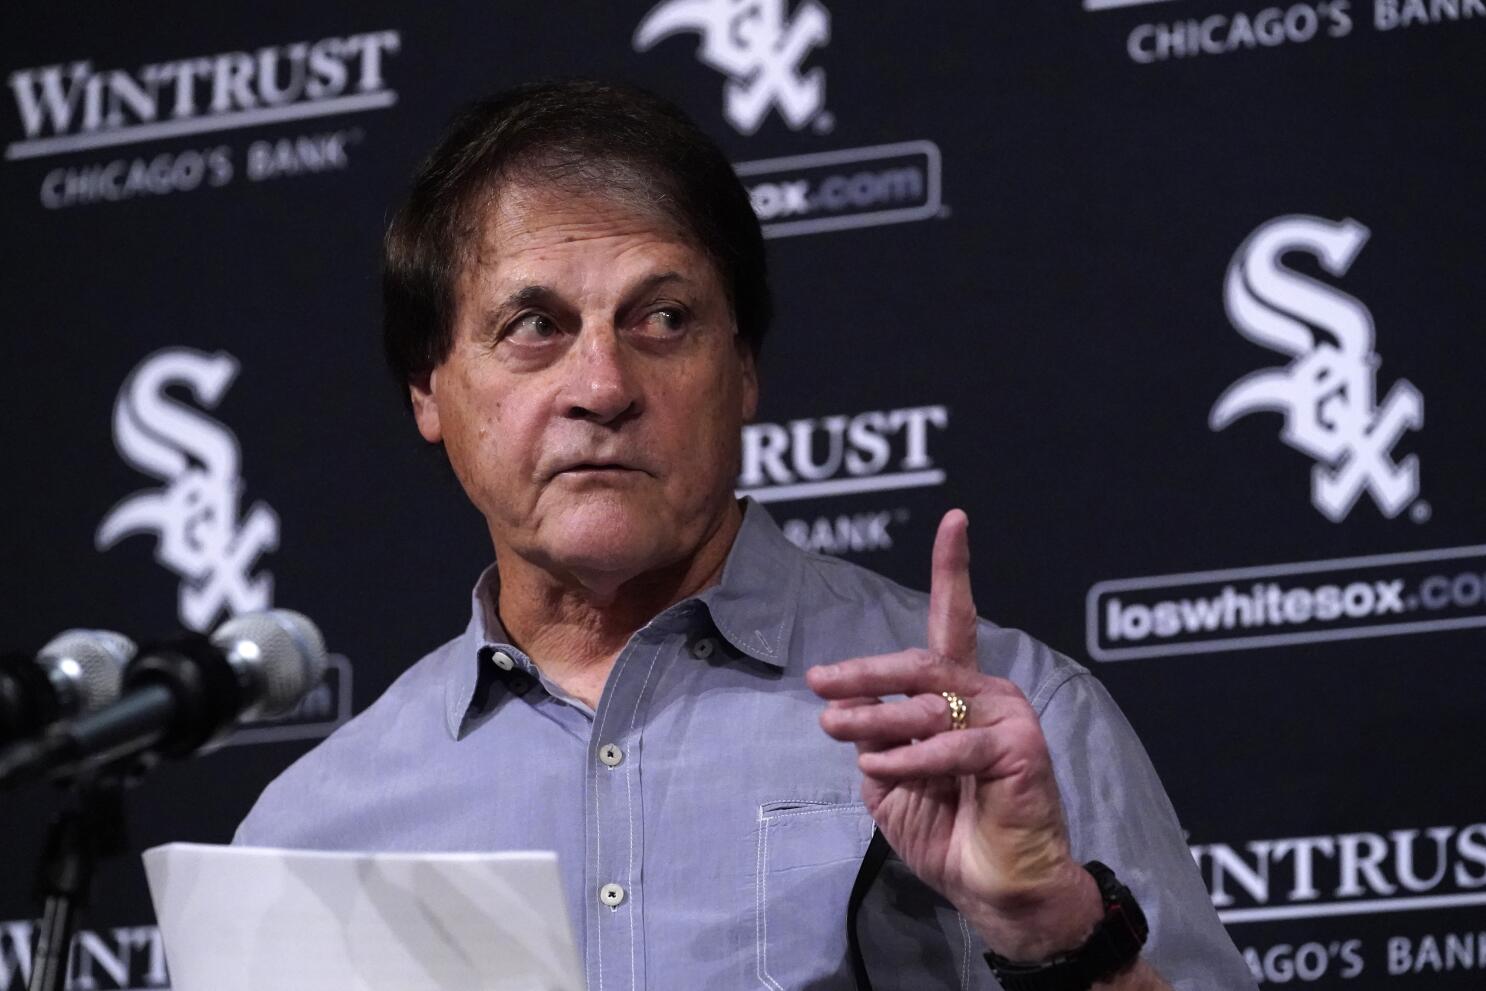 Oakland A's news: Tony La Russa hired as Chicago White Sox manager